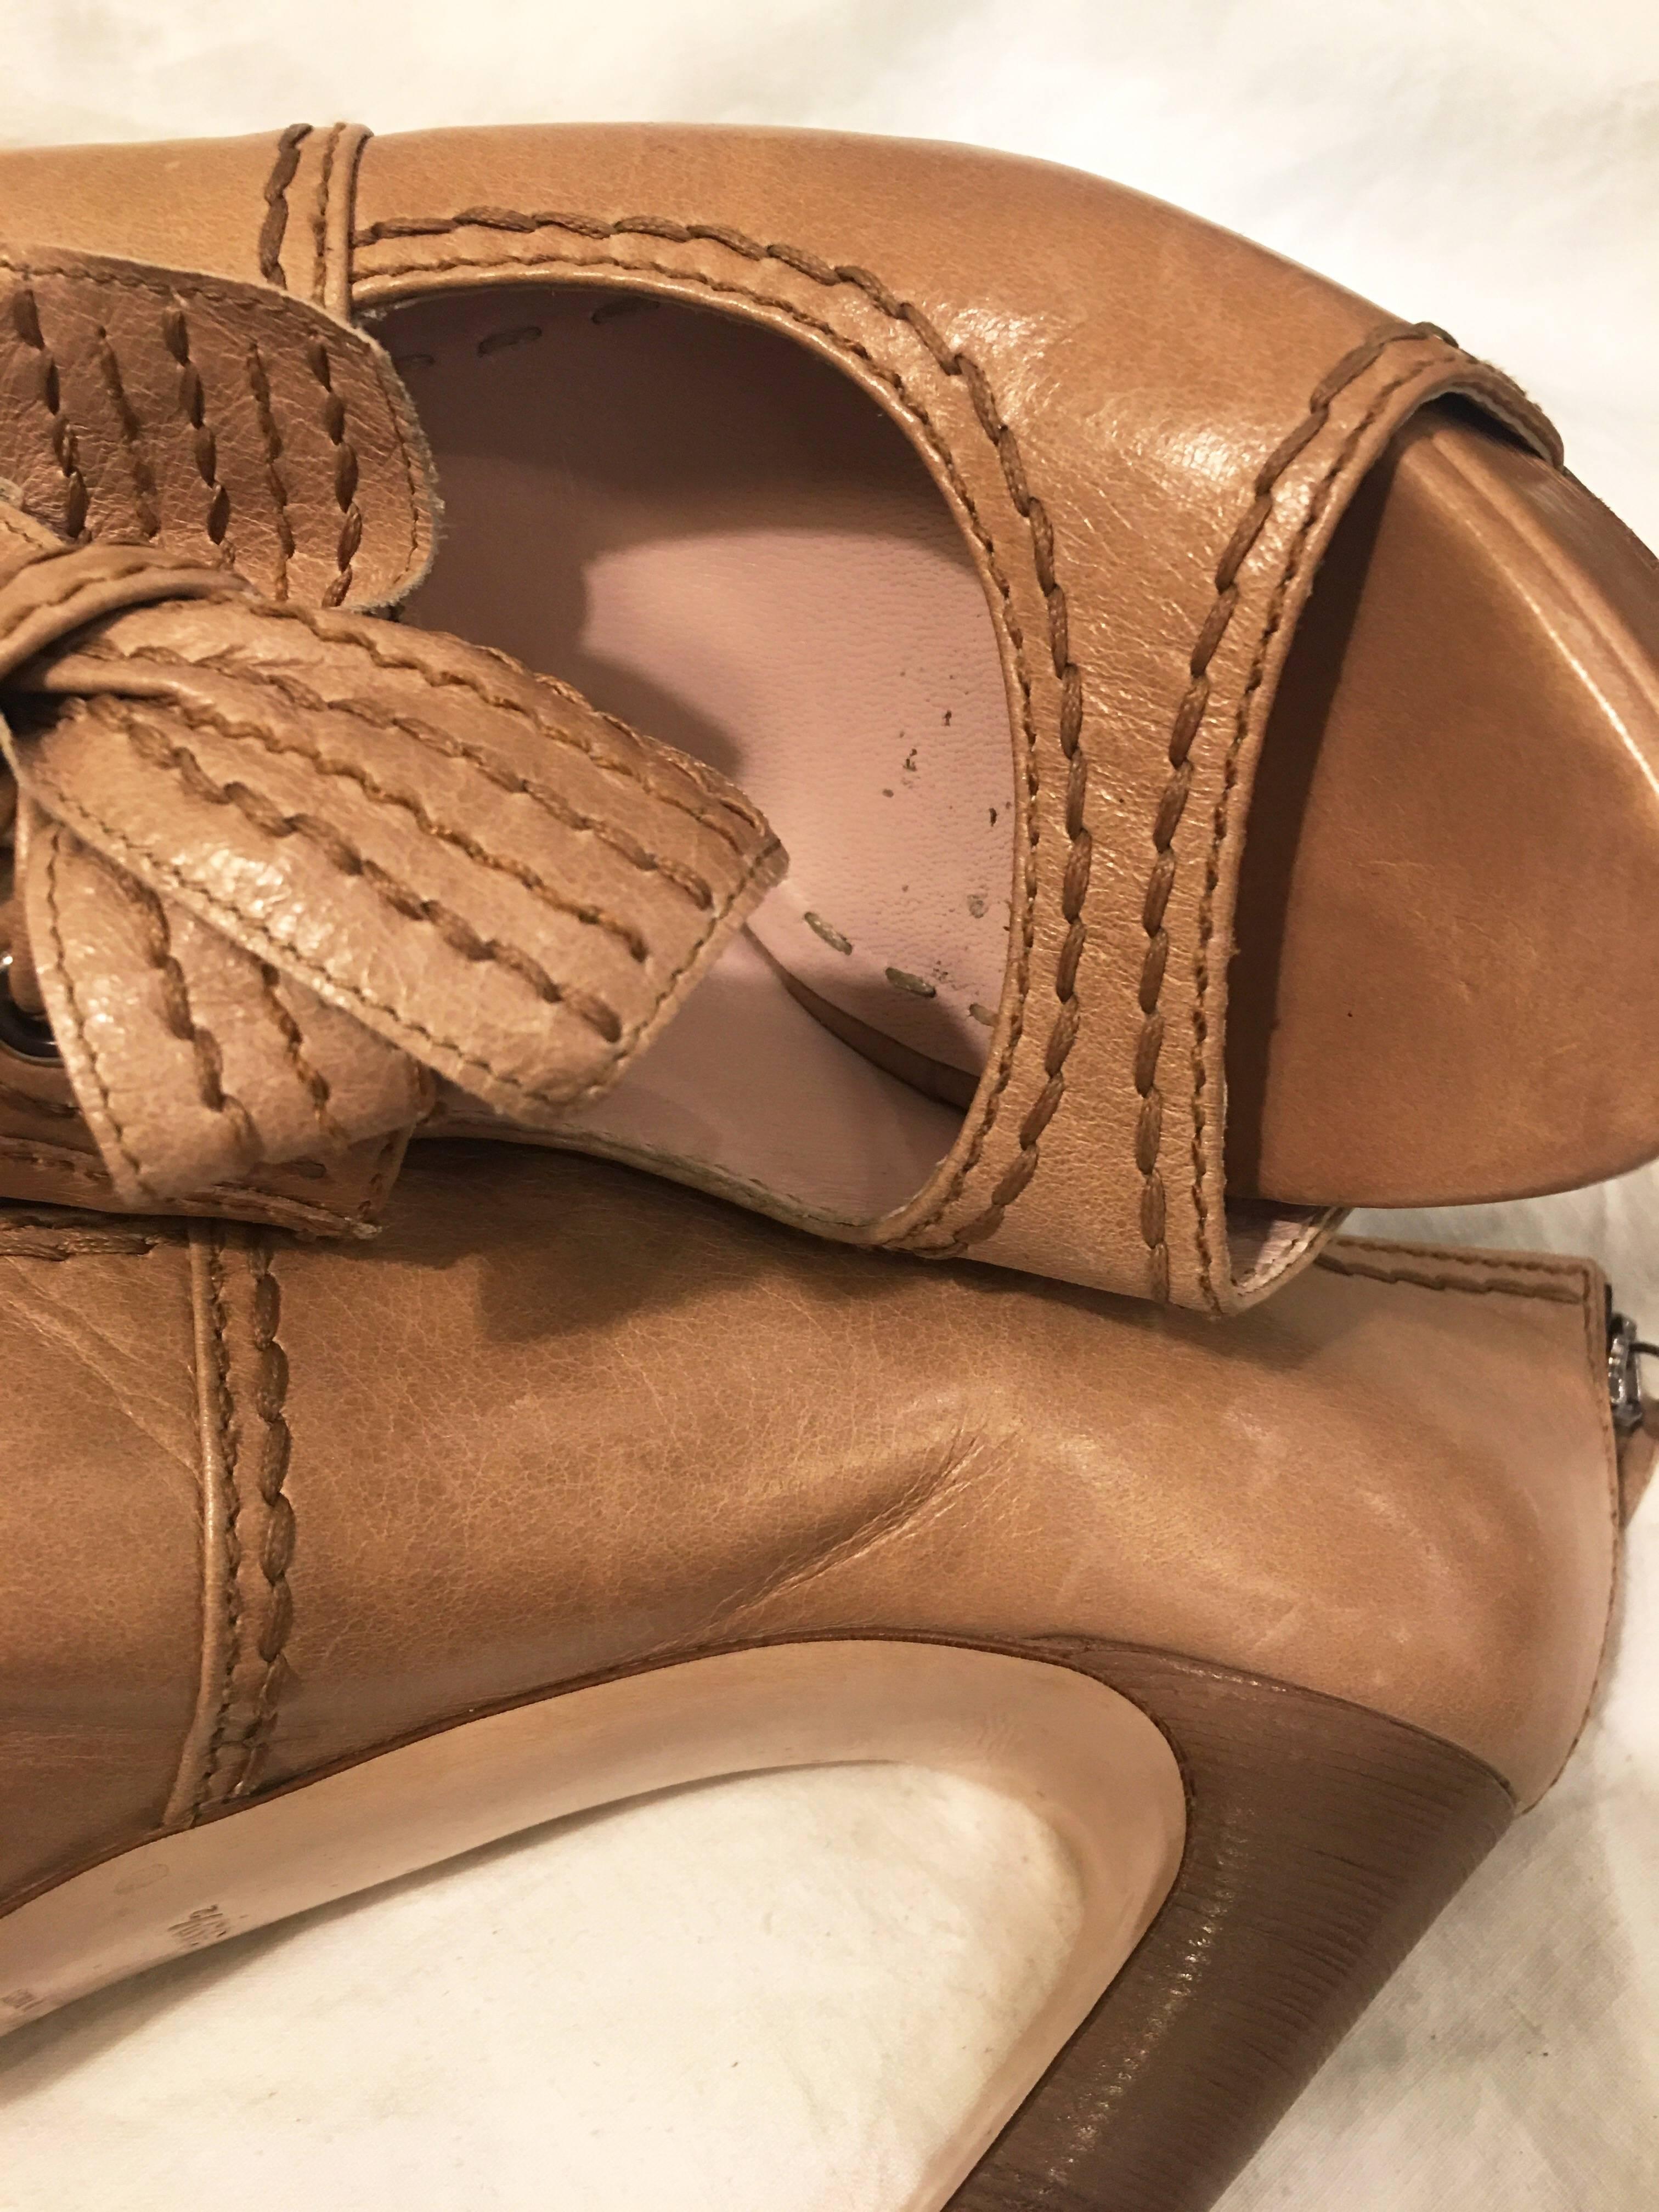 Miu Miu Beige “Mary Jane” Open Toe with Bow Pumps In Excellent Condition For Sale In Brooklyn, NY